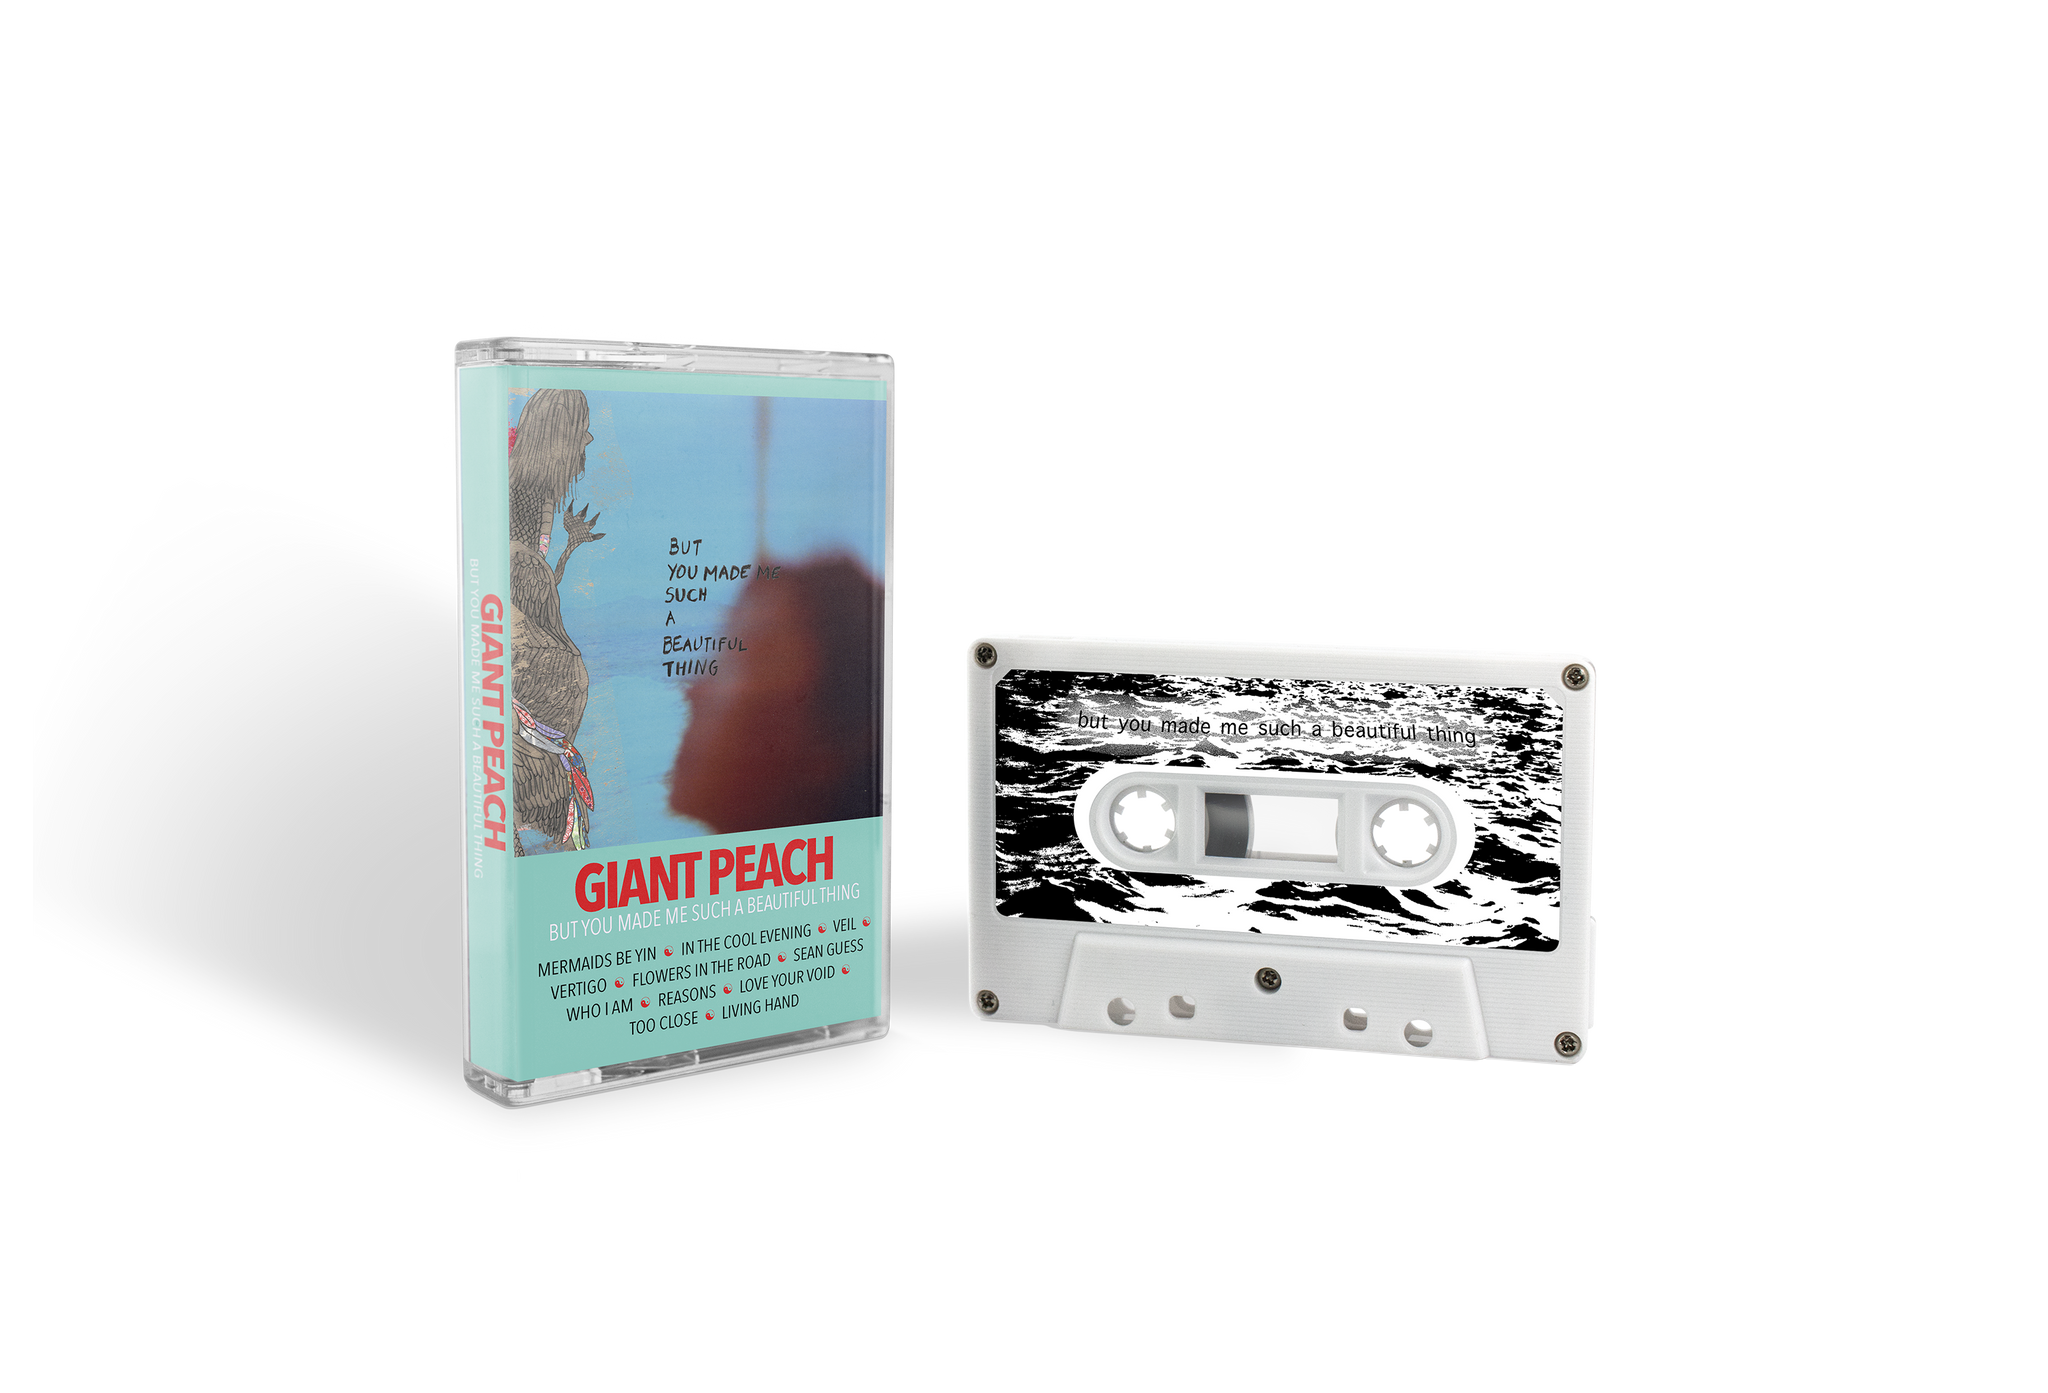 Giant Peach "But You Made Such A Beautiful Thing" Cassette